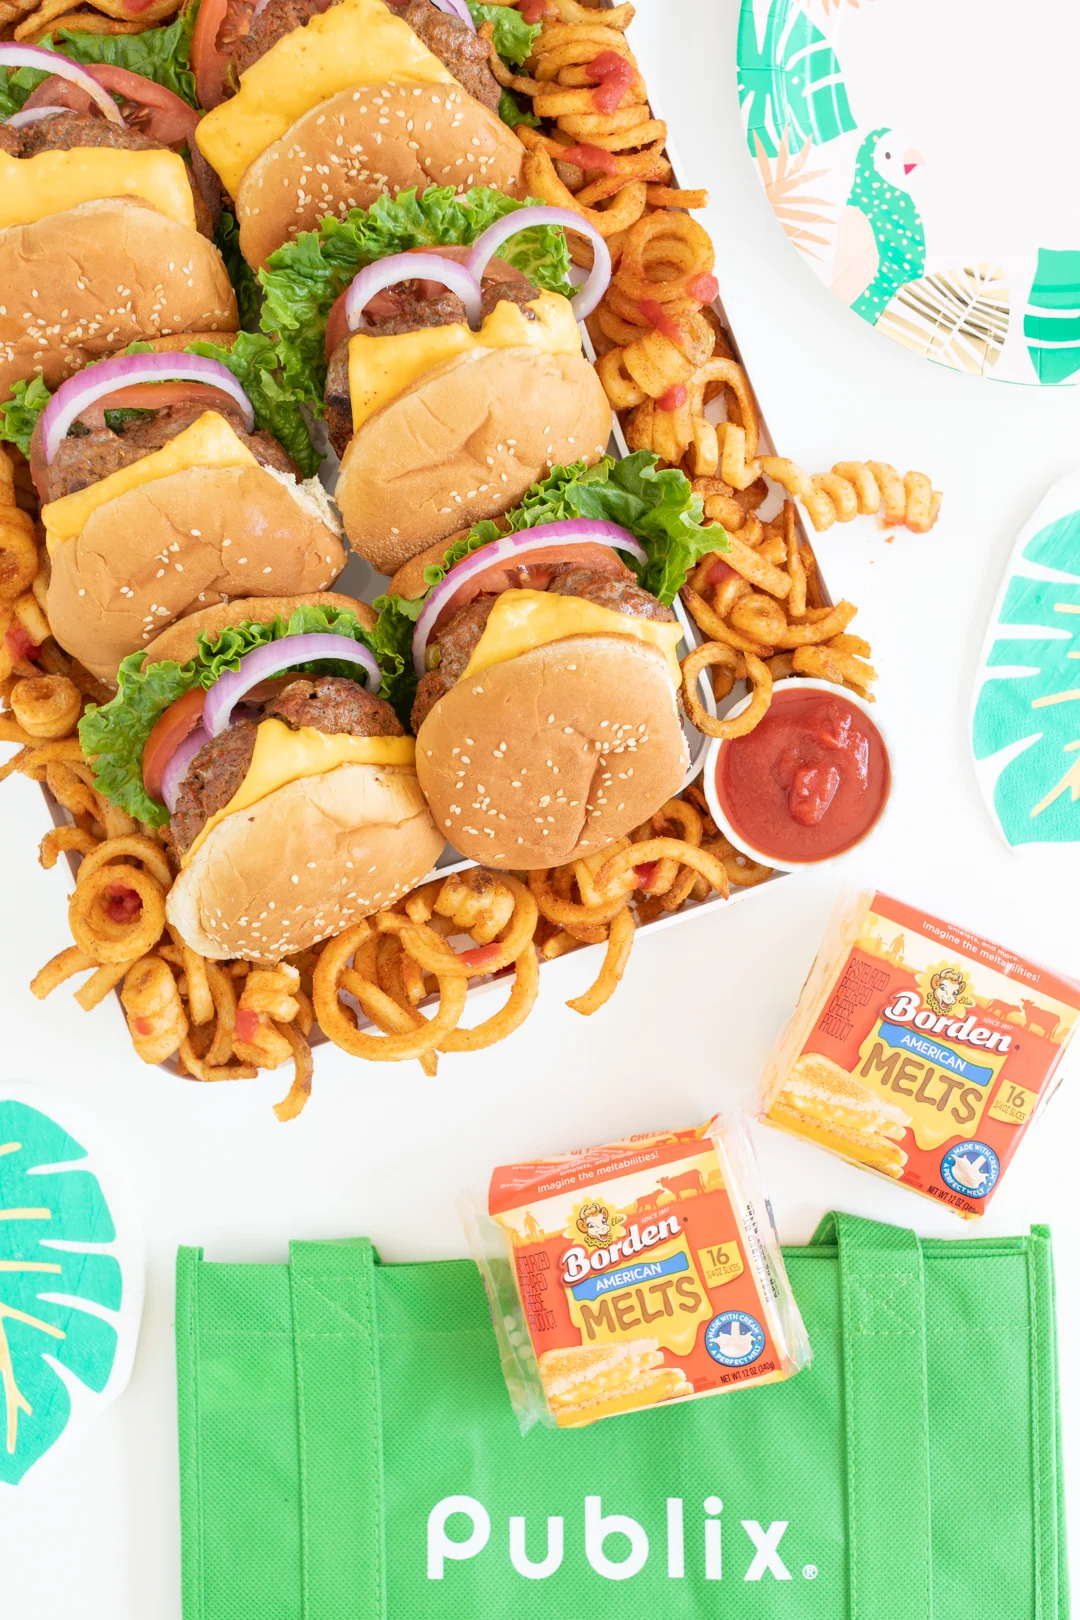 burger tray with curly fries shown with green publix reusable bag and packages of borden american melts